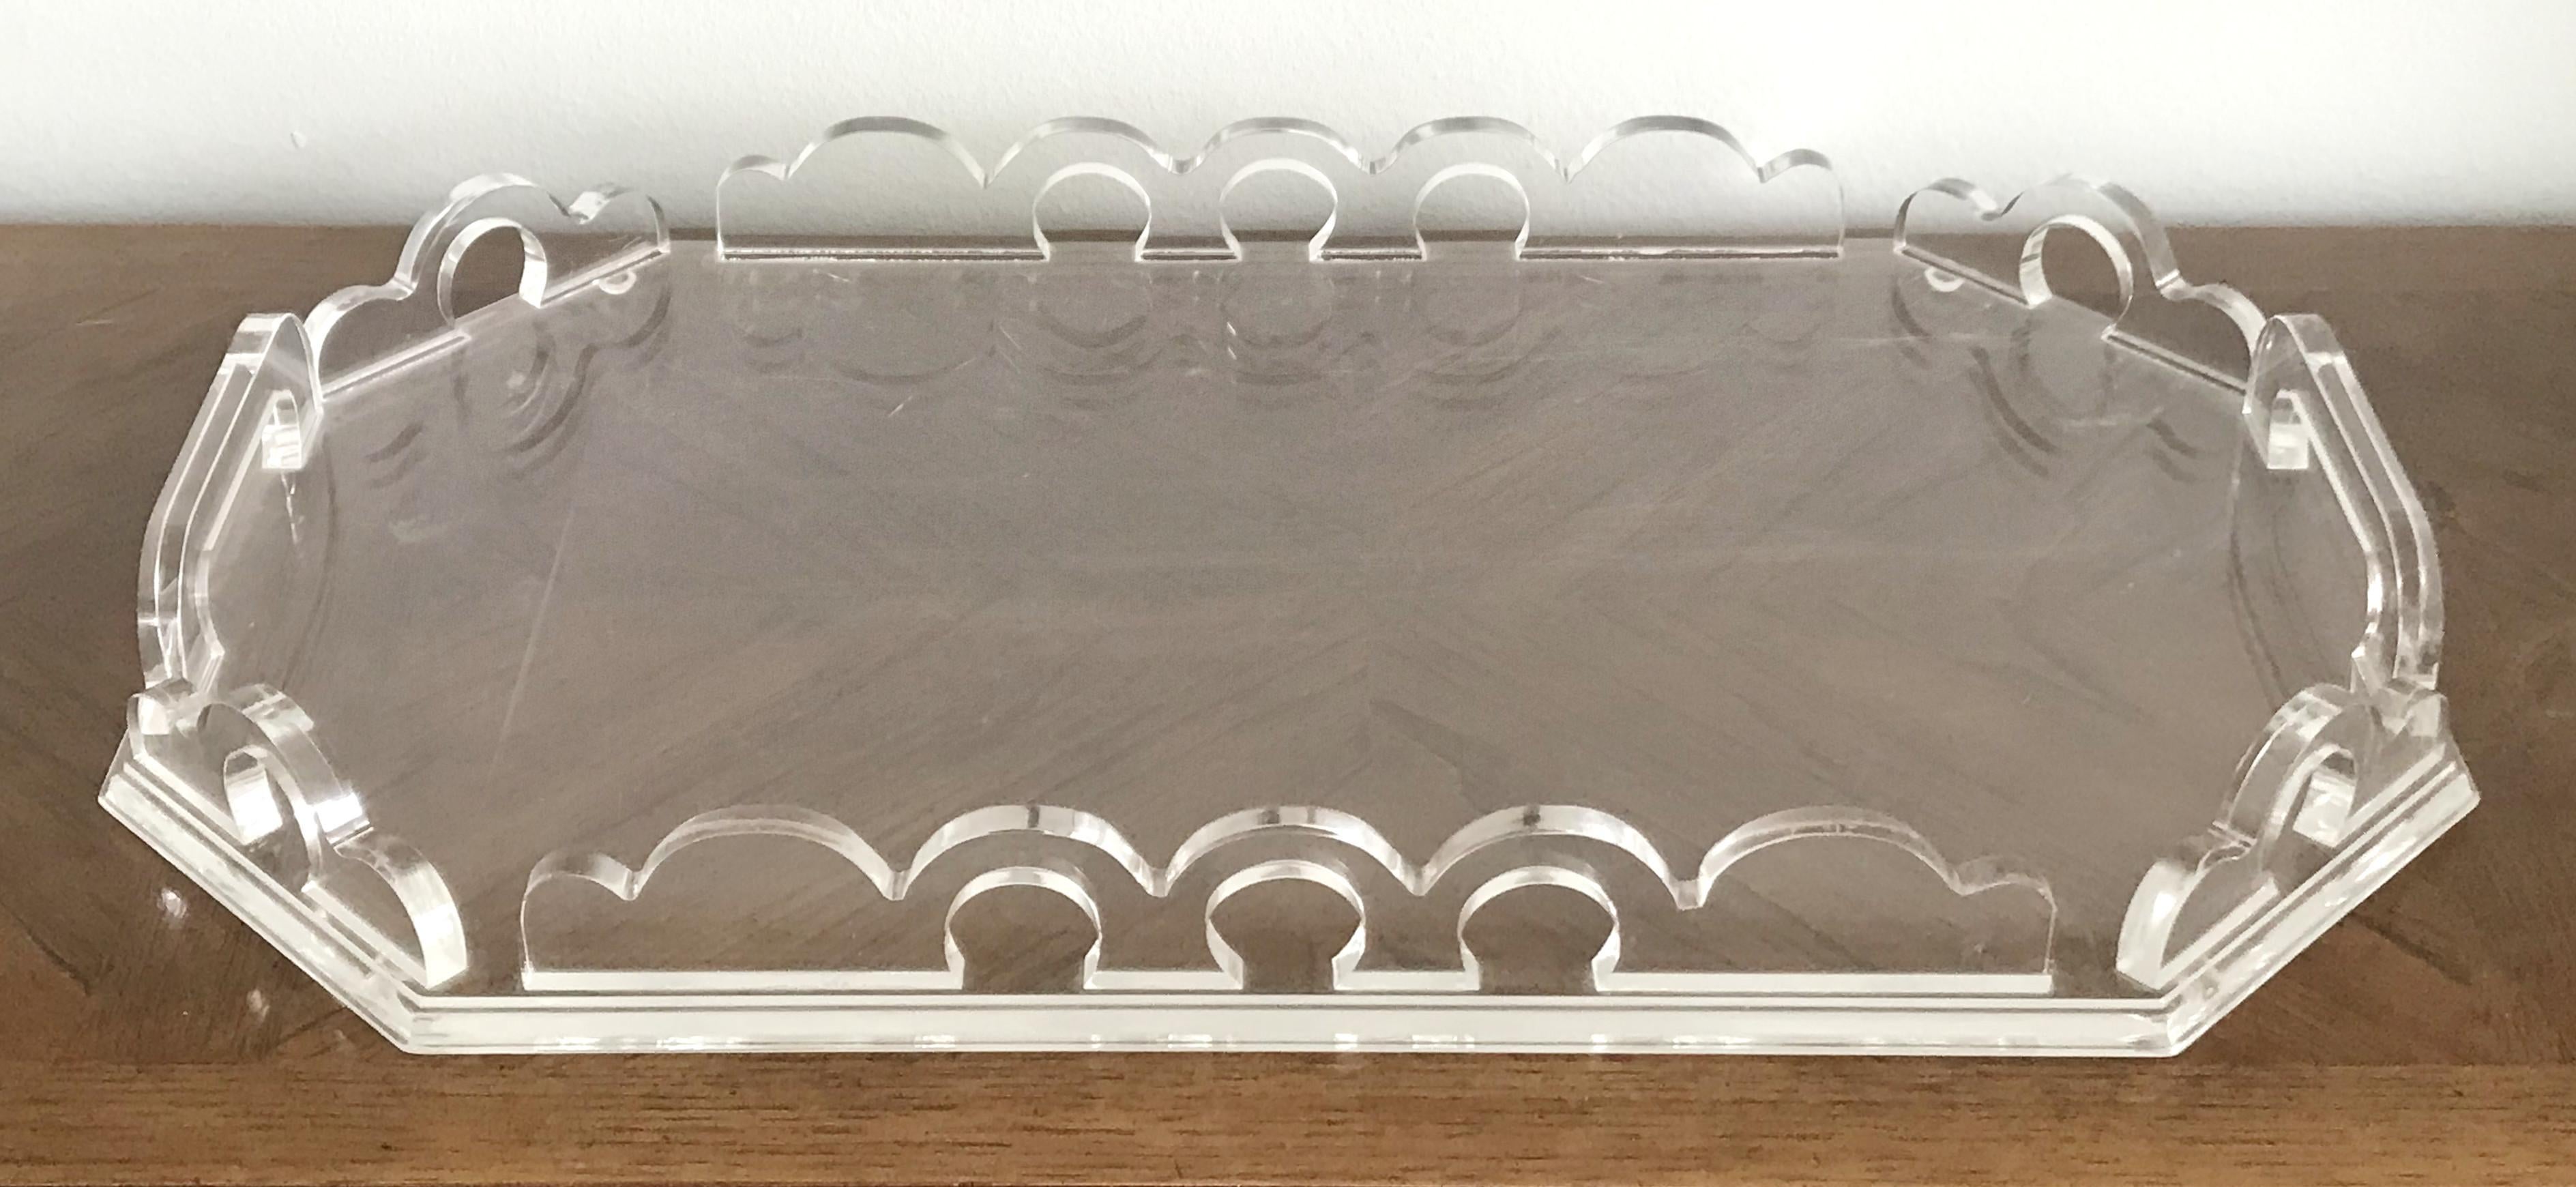 Vintage serving tray with handles entirely made of lucite / Made in the USA, circa 1970s
Measures: width 25.5 inches, depth 16 inches, height 2.5 inches 
1 in stock in Palm Springs ON 50% OFF SALE for $449 !!!
Order reference #: FABIOLTD G192
This